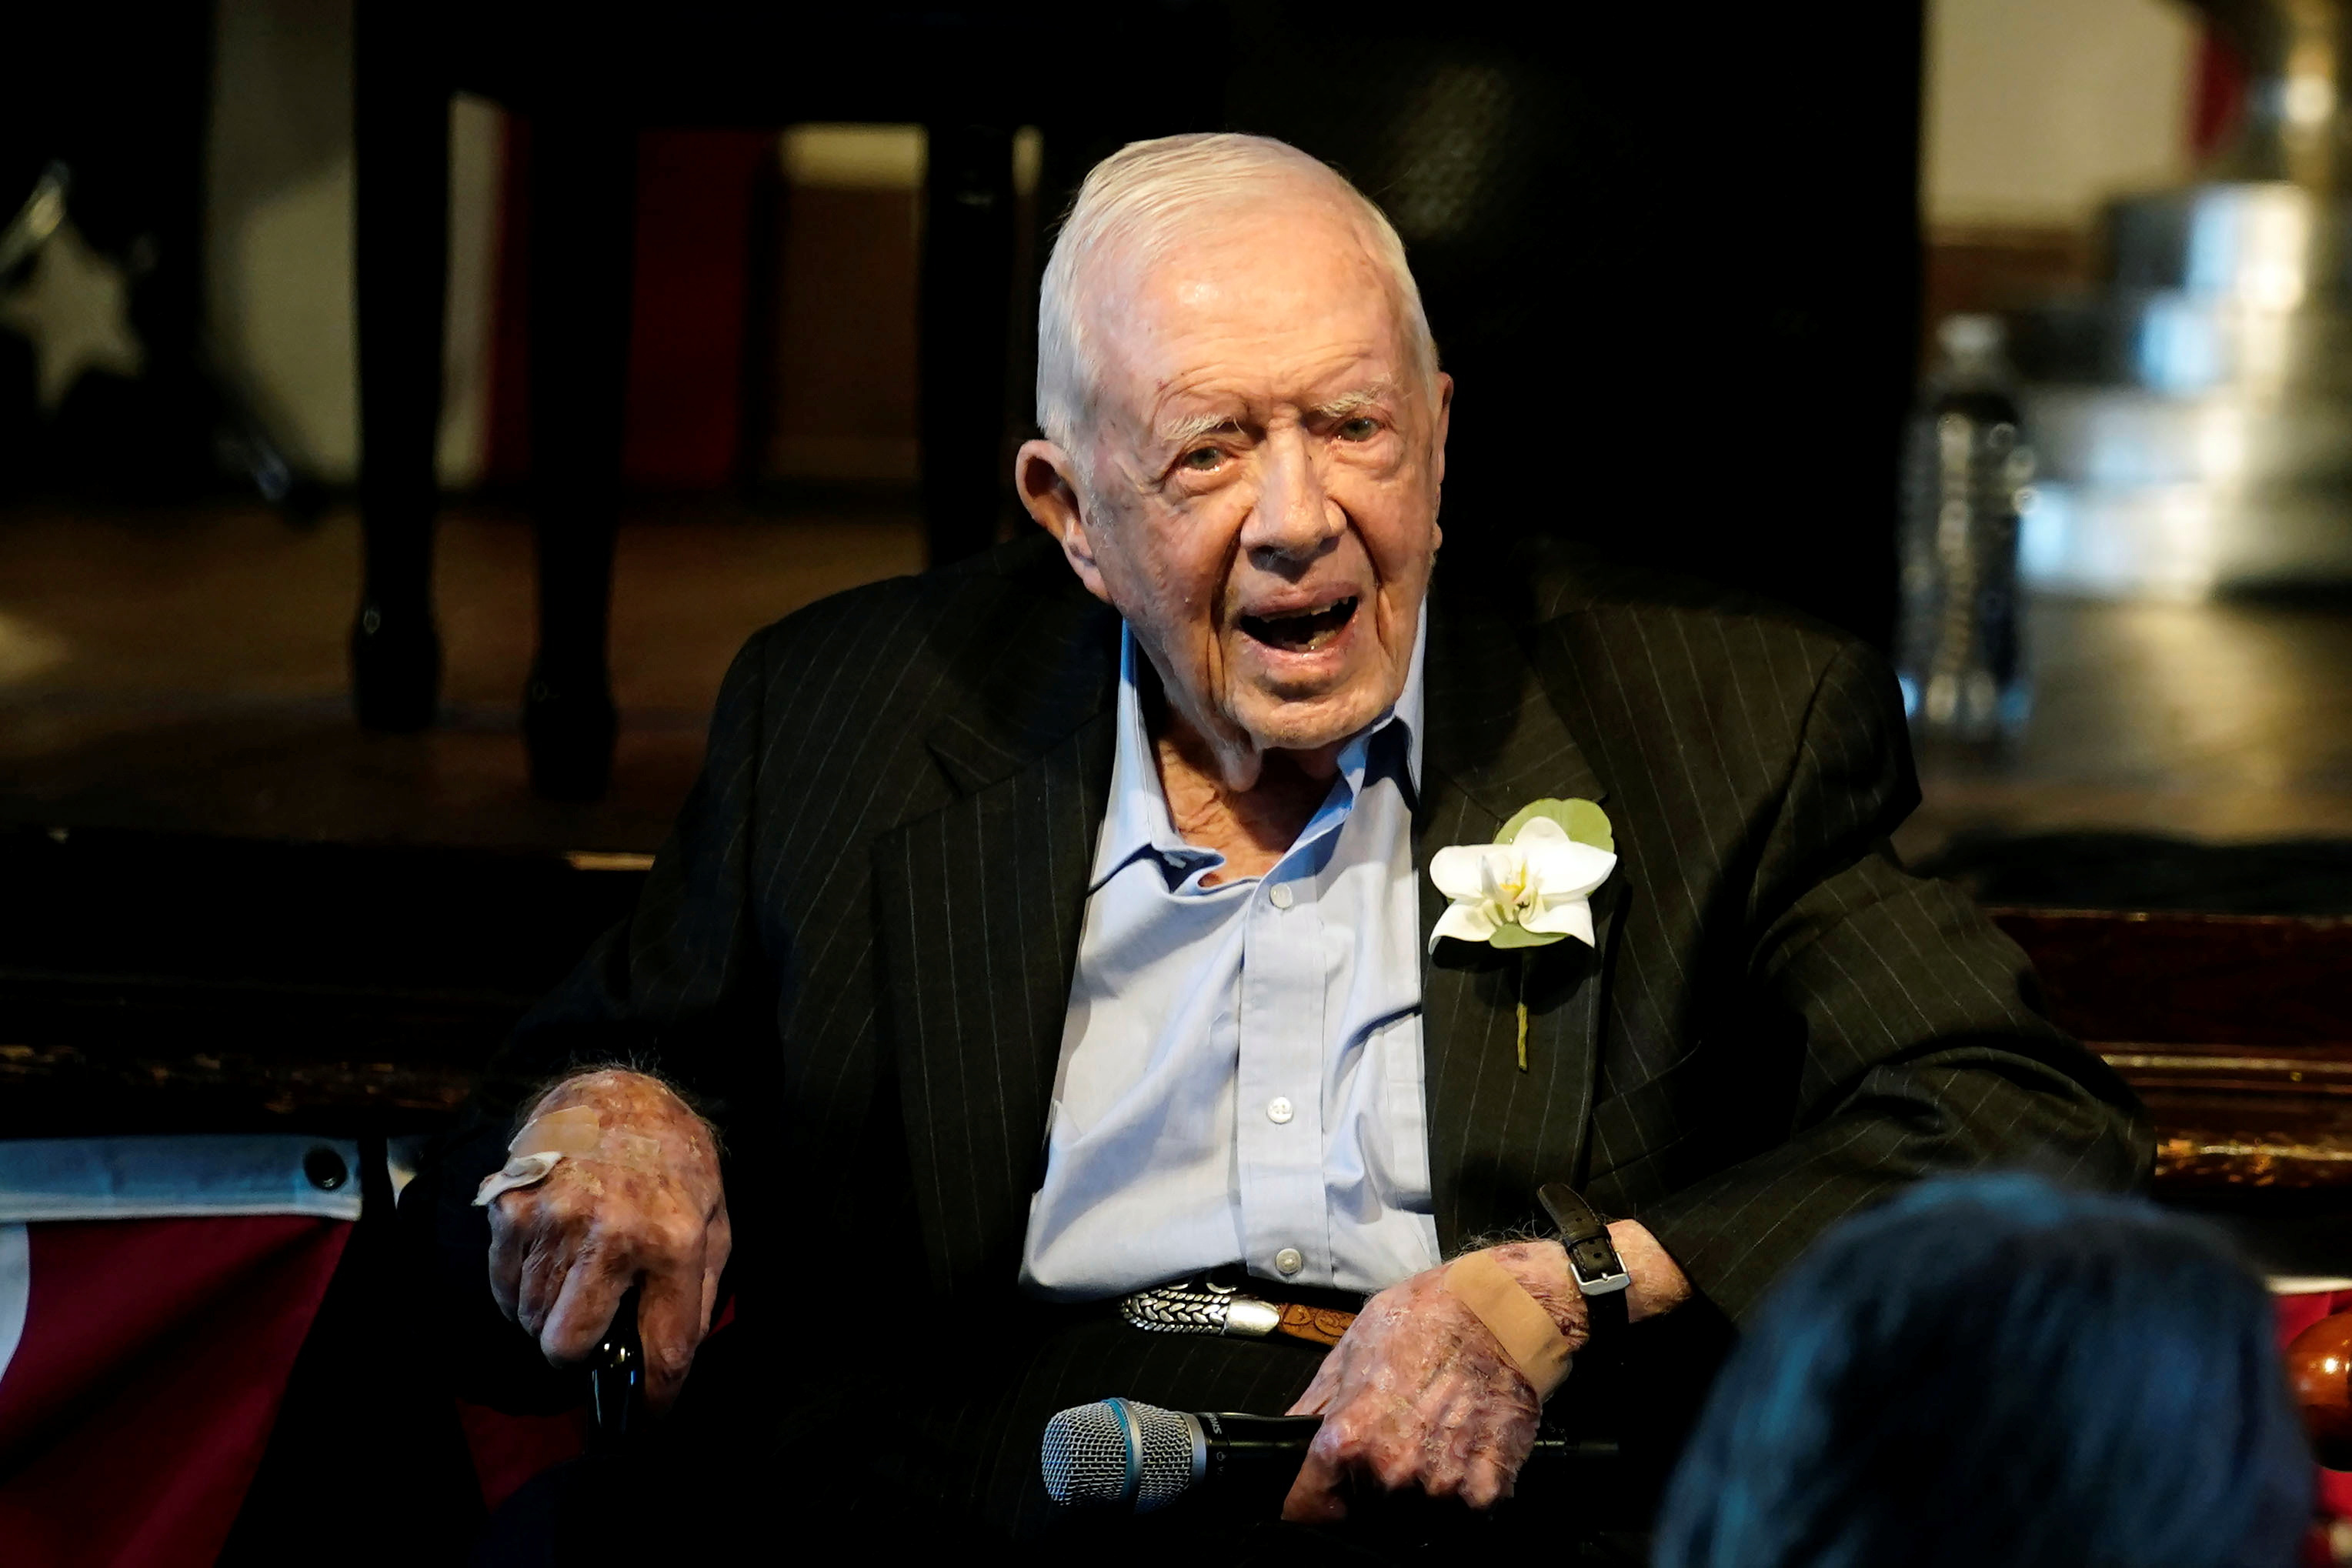 Americans celebrate Jimmy Carter's 99th birthday as he receives hospice